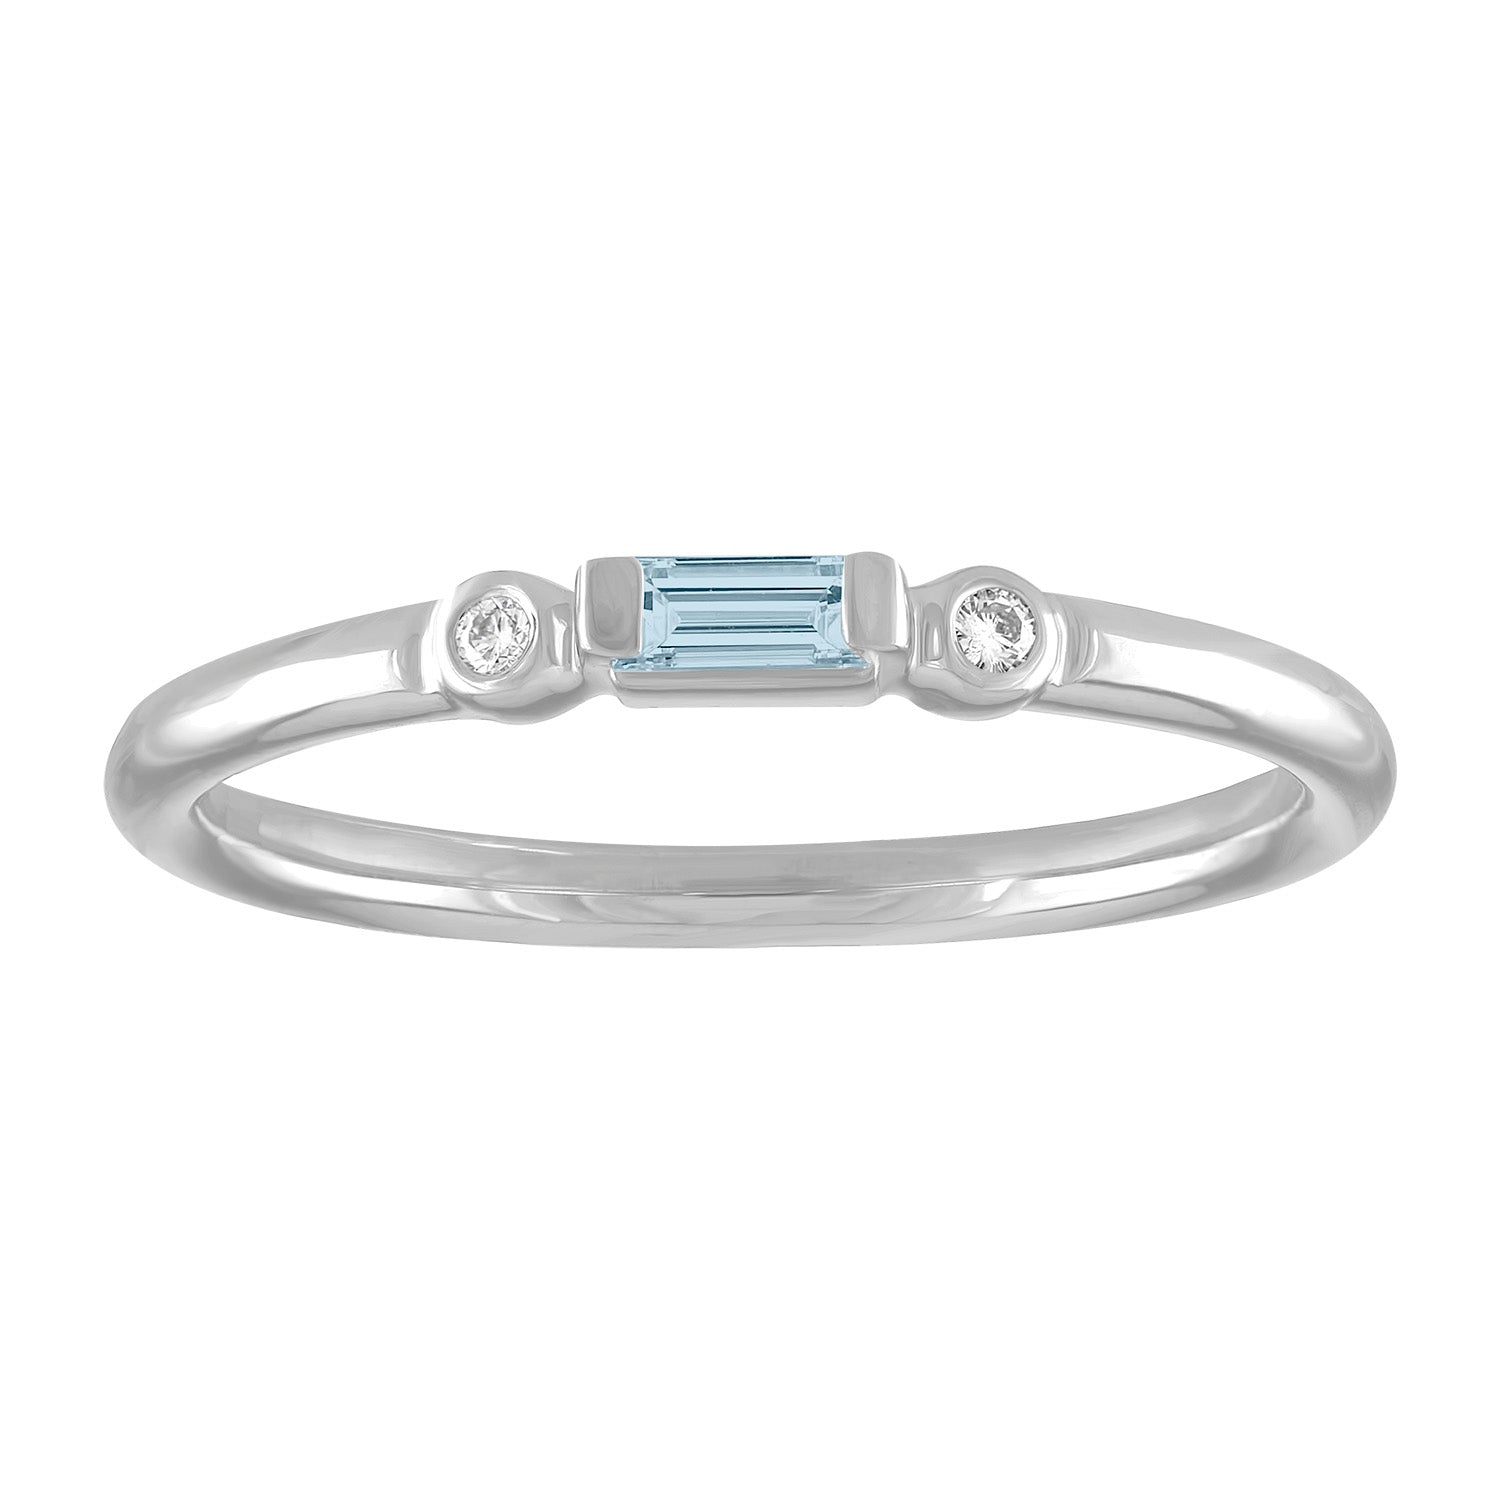 White gold skinny band with an aquamarine baguette in the center and two round diamonds on the side. 